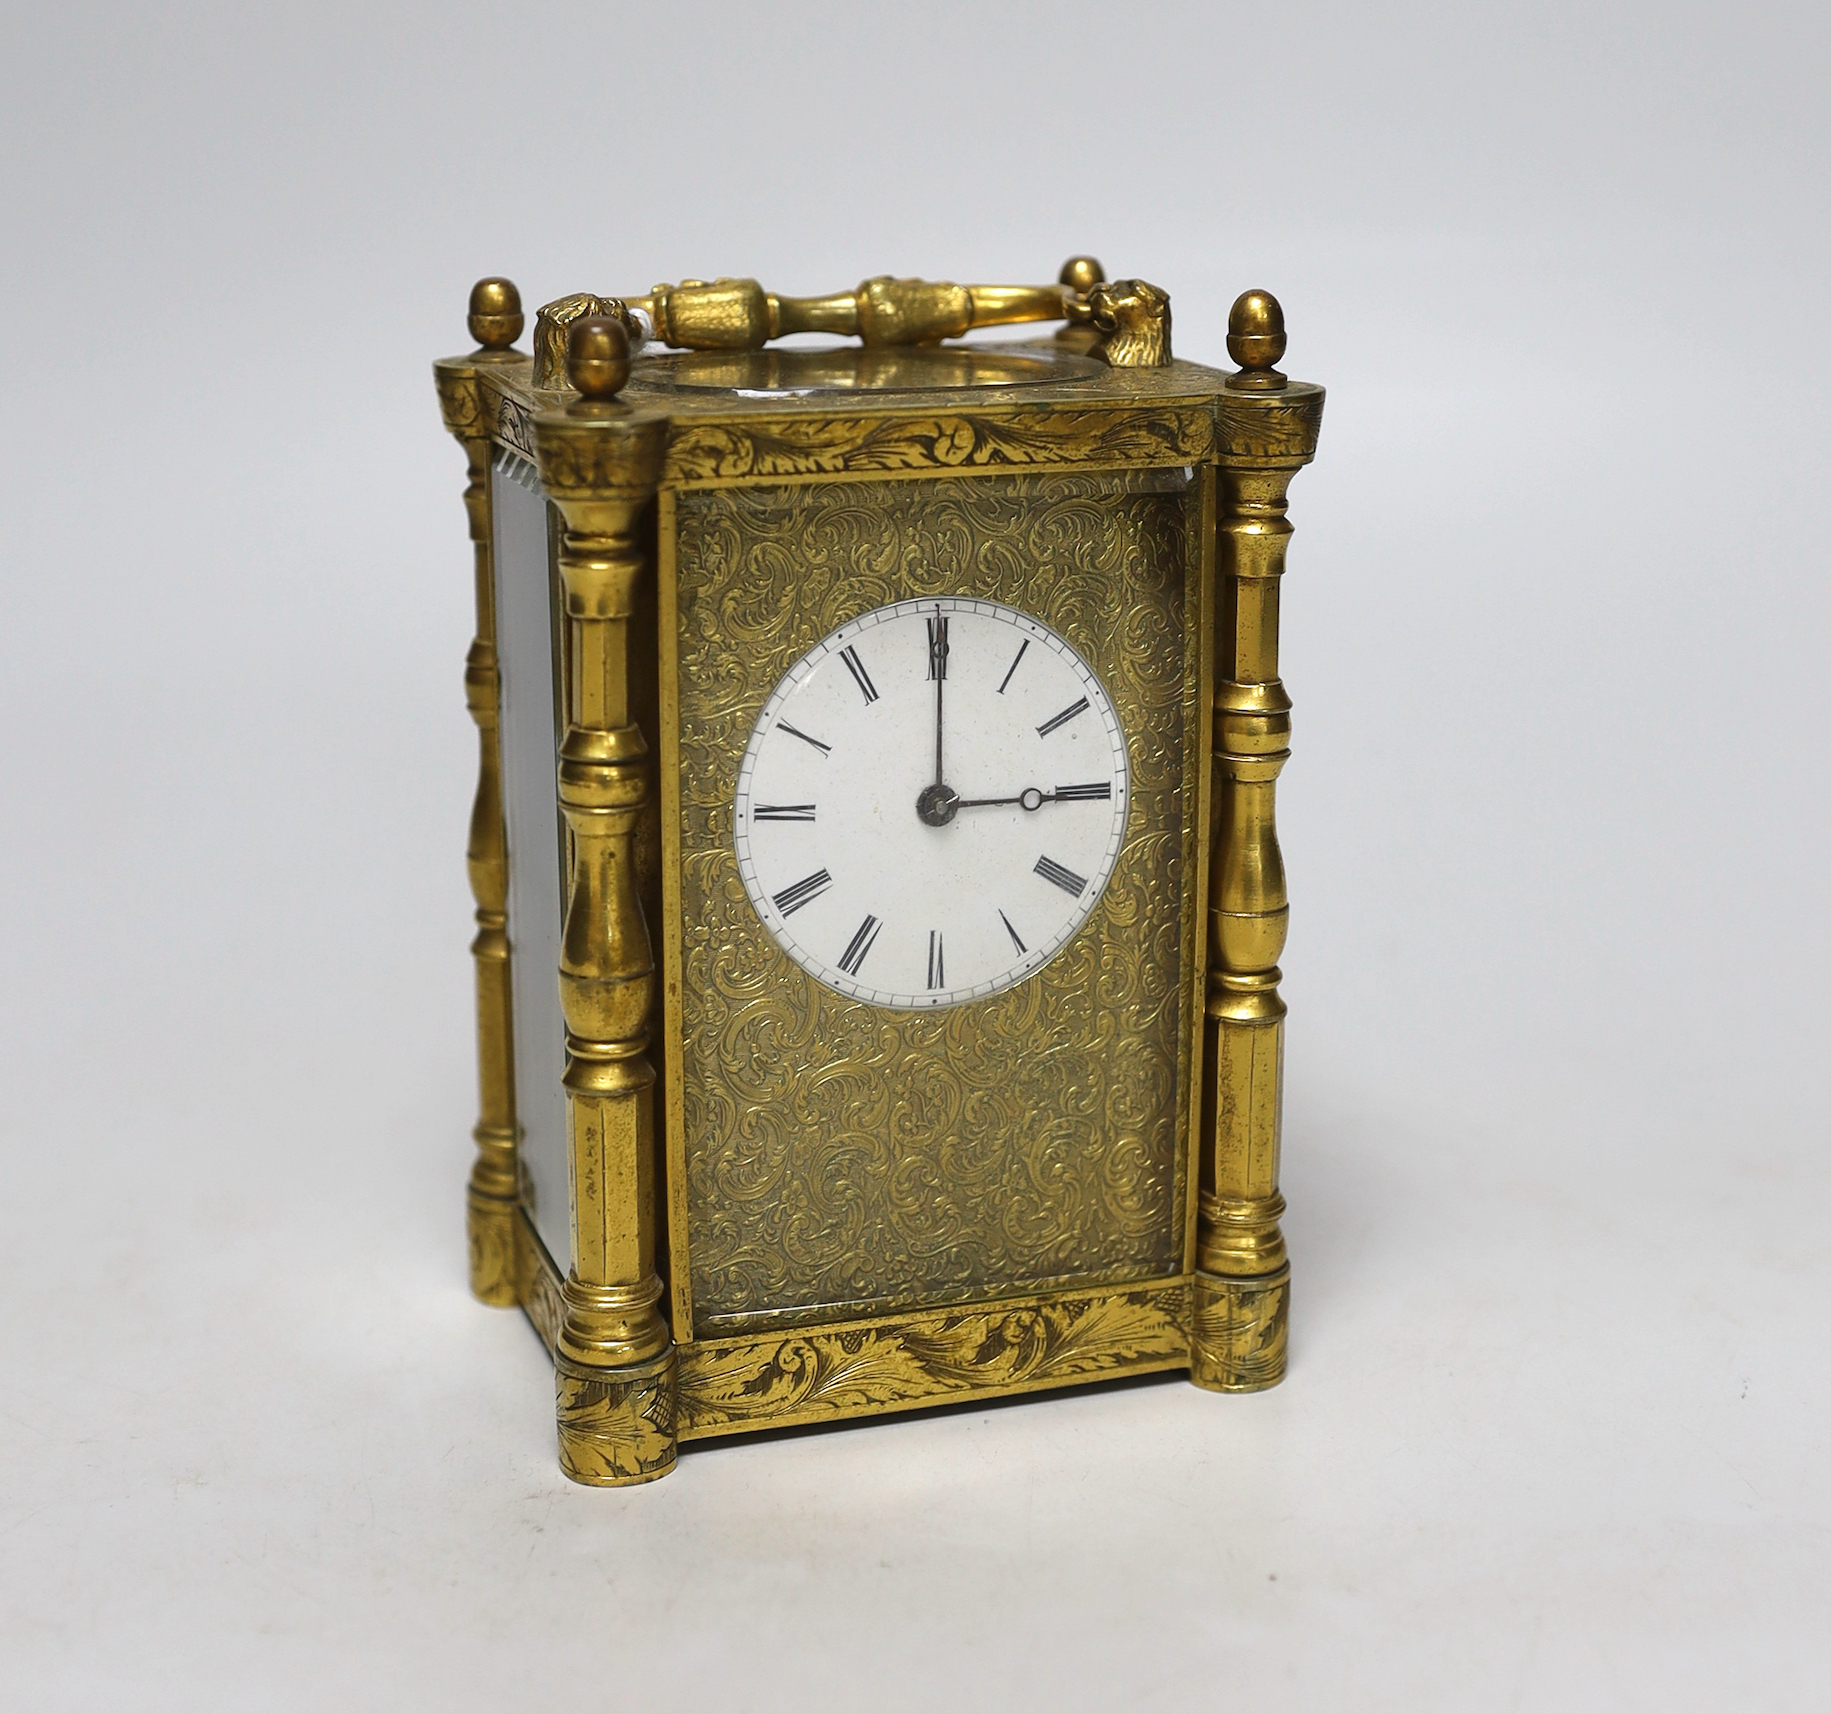 A mid 19th century French engraved gilt brass carriage clock, with tooled leather case, 16cm high